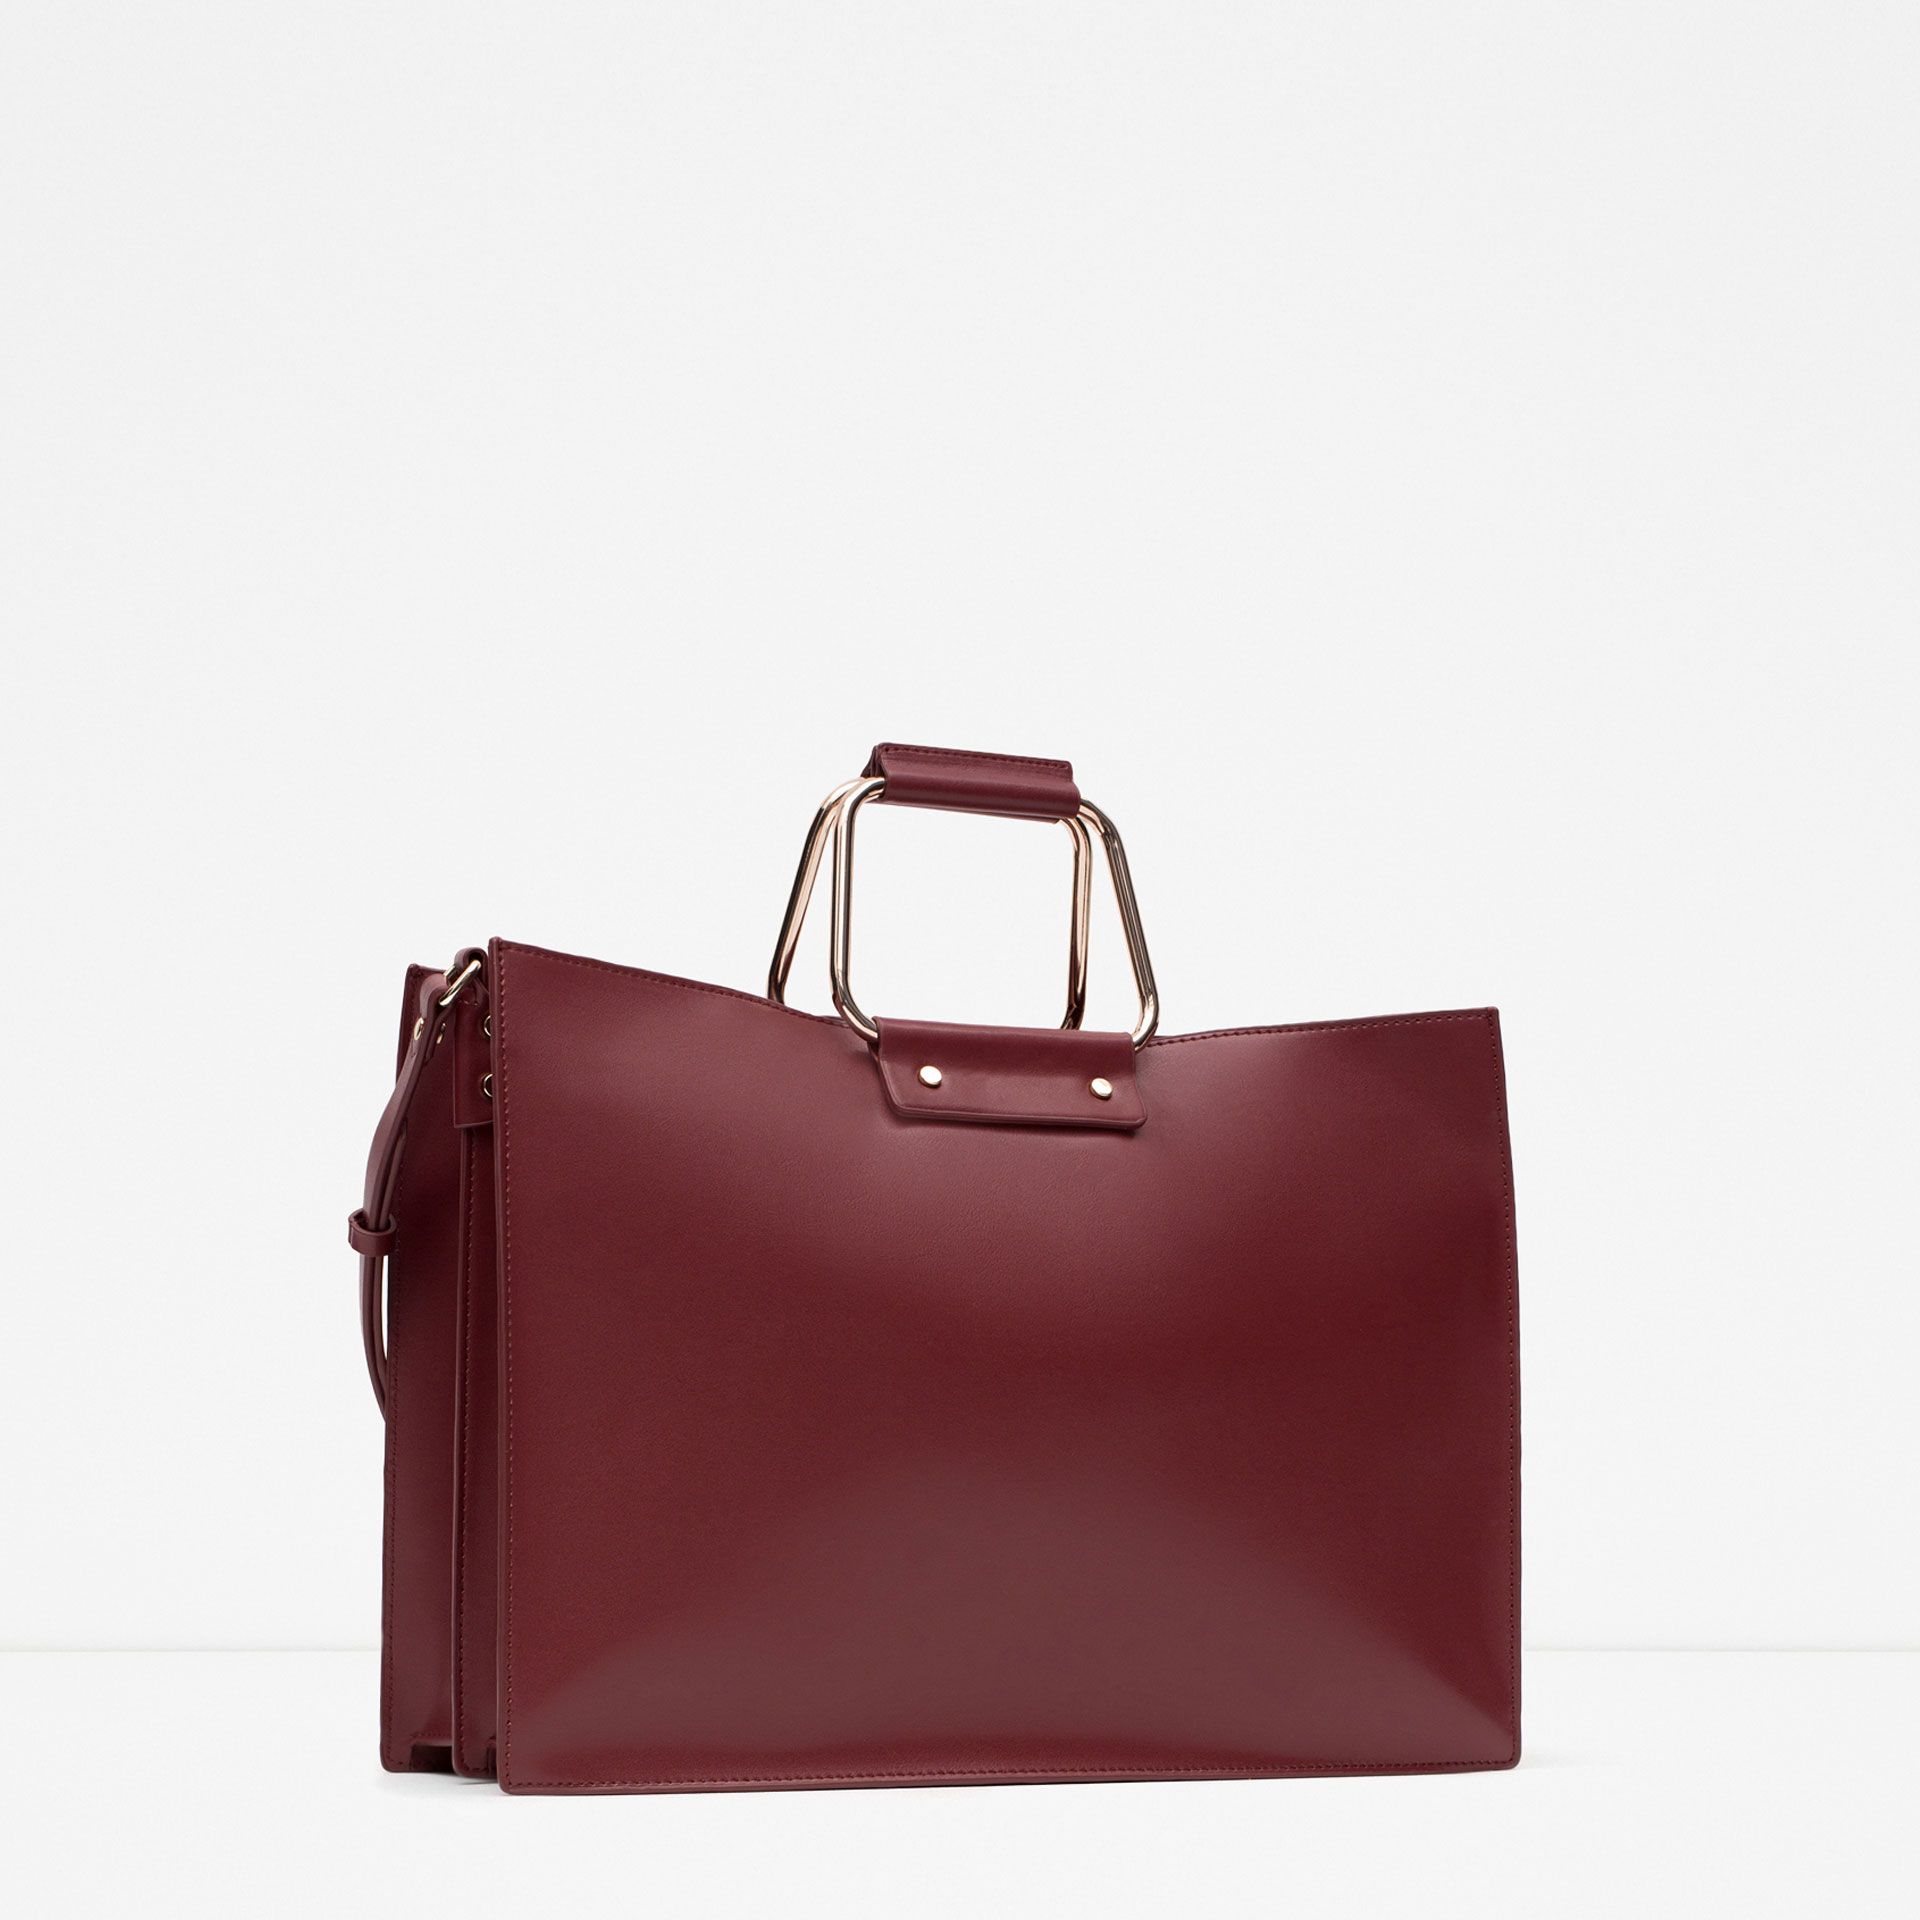 TOTE WITH METALLIC HANDLE - View all - Bags - WOMAN | ZARA United ...